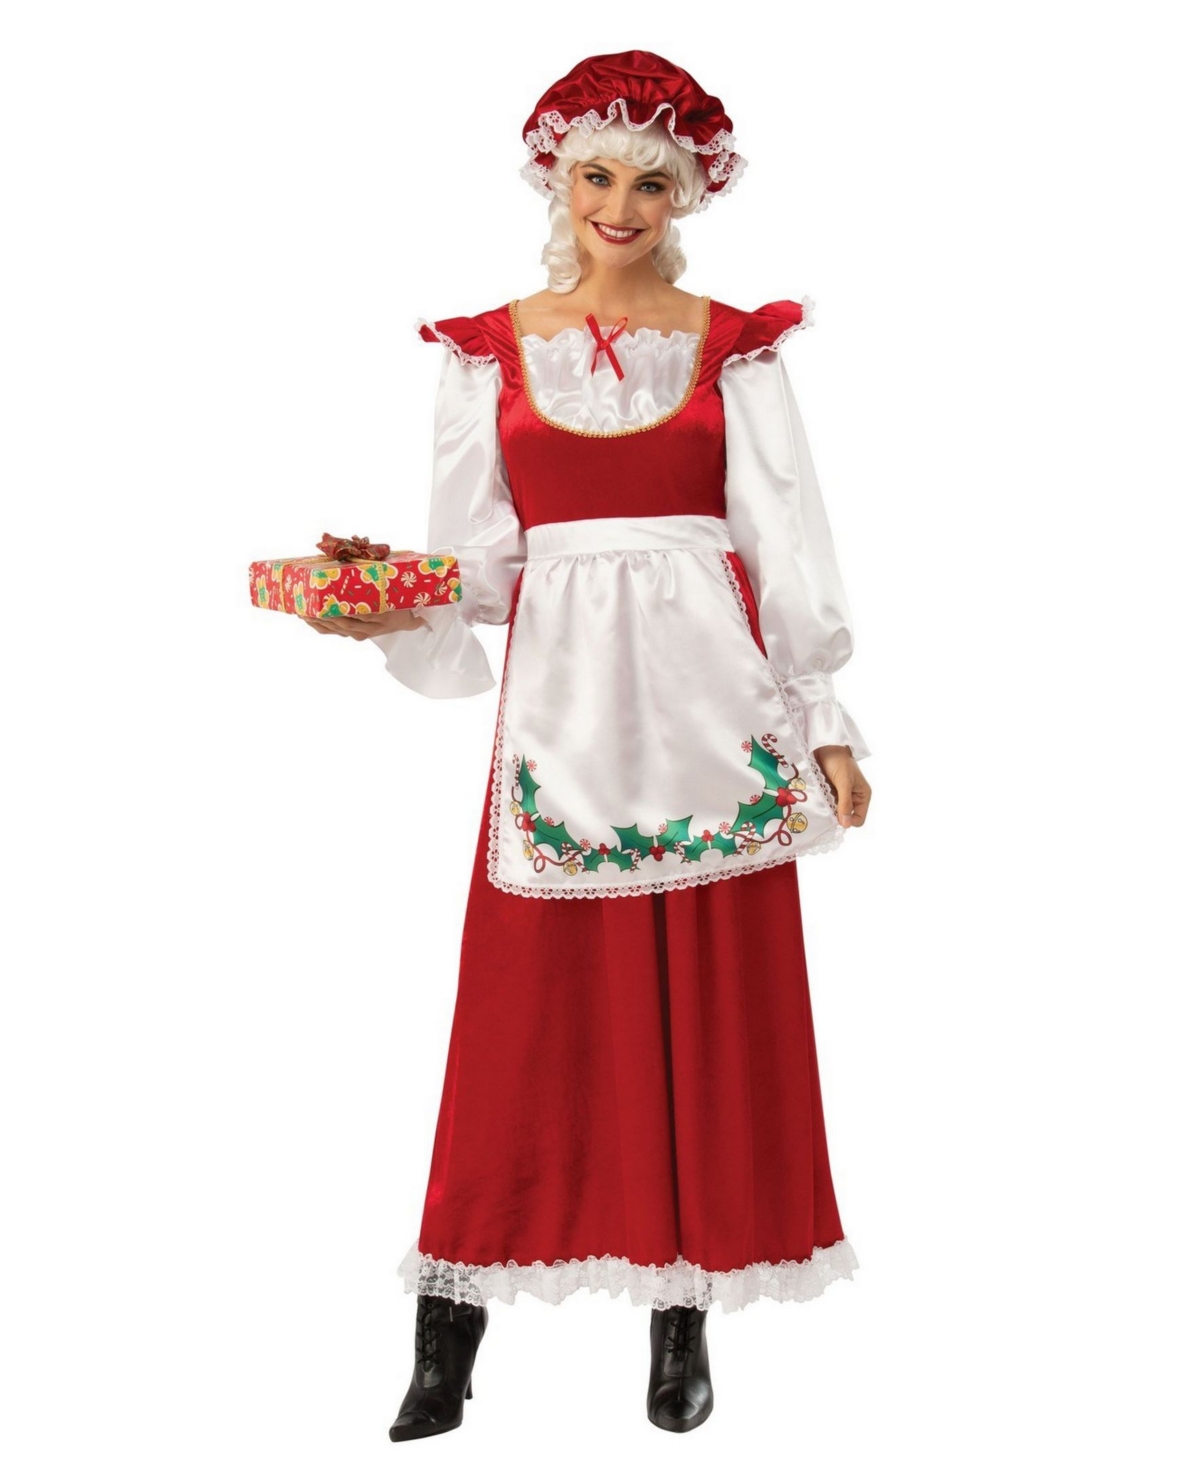 Women's Ms. Santa Claus Adult Costume - Red